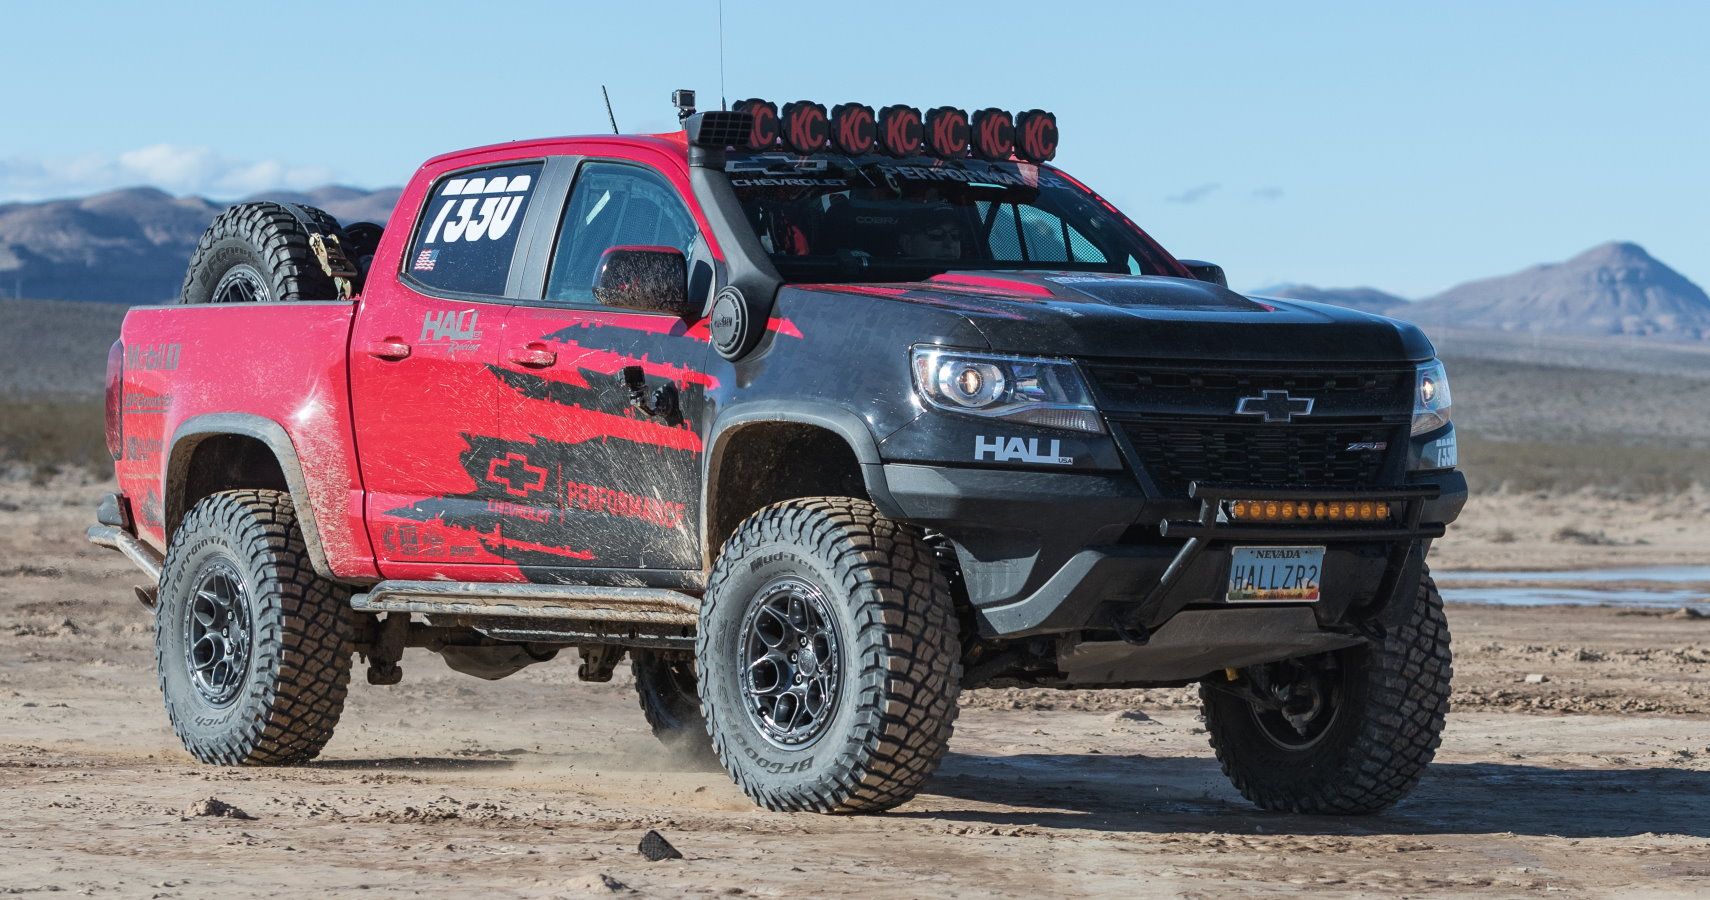 The Chevrolet Colorado ZR2 is competing in its third Best in the Desert Vegas to Reno race.